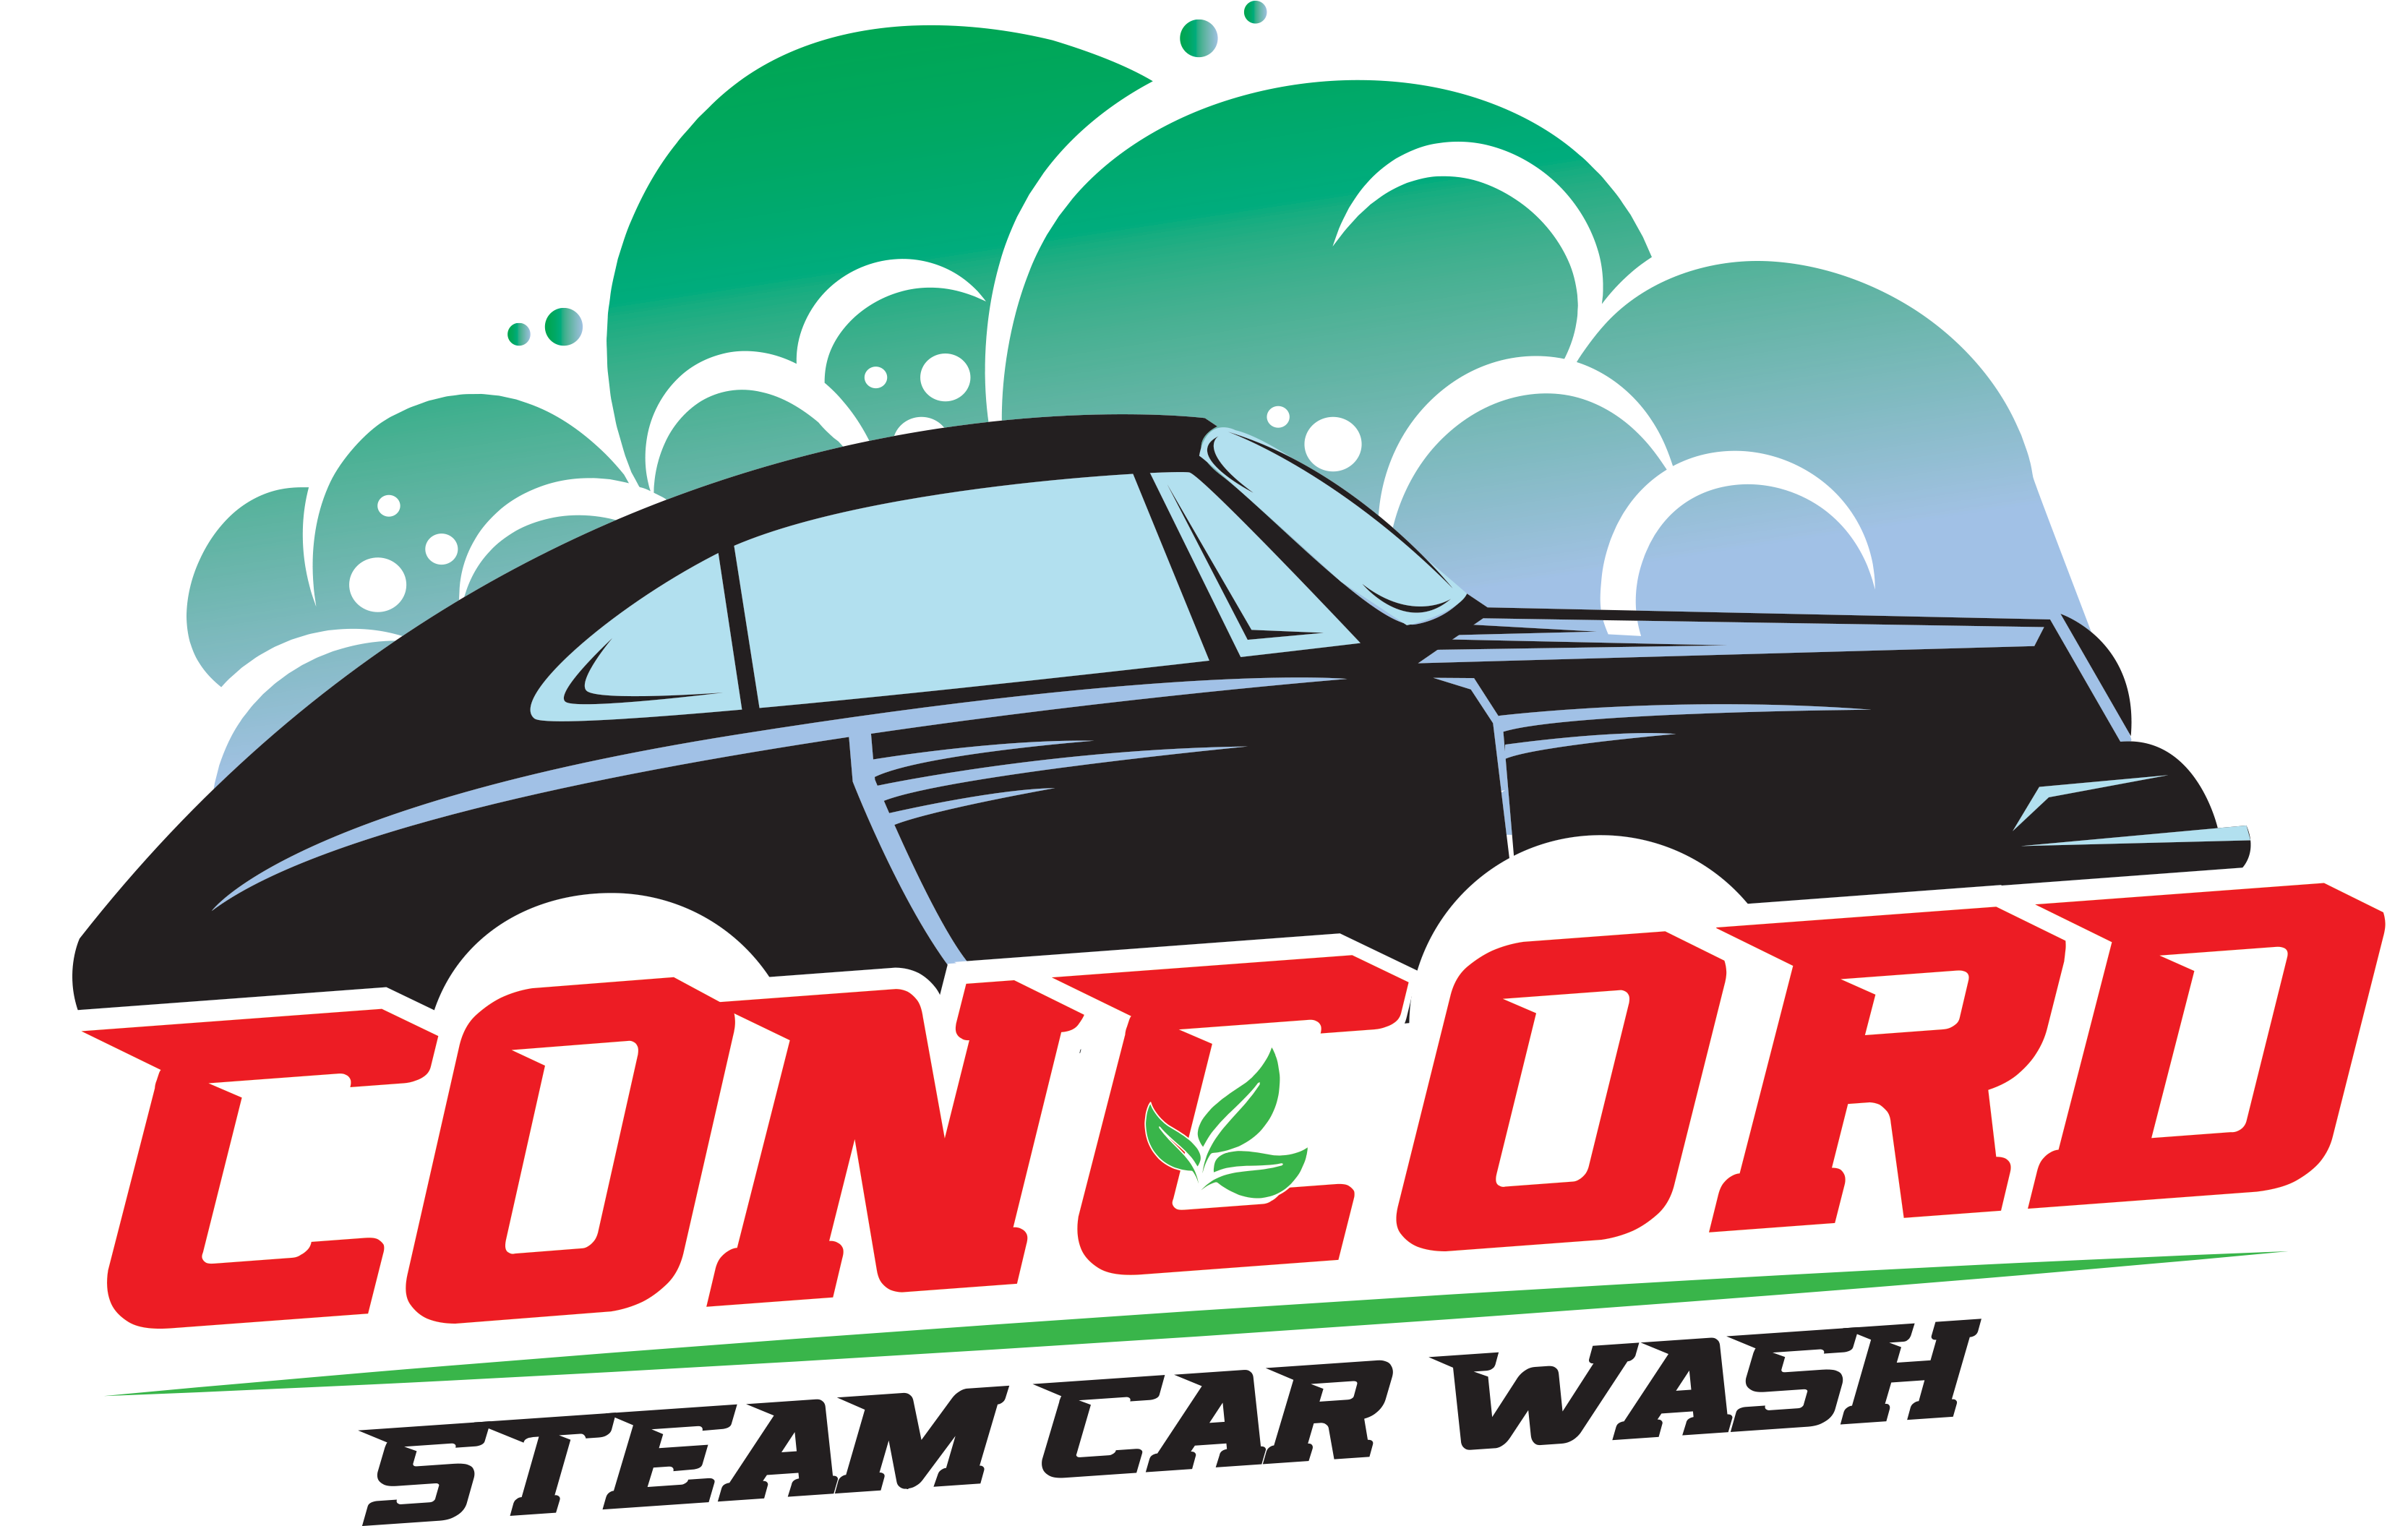 Concord Steam Car Wash Logo PNG image